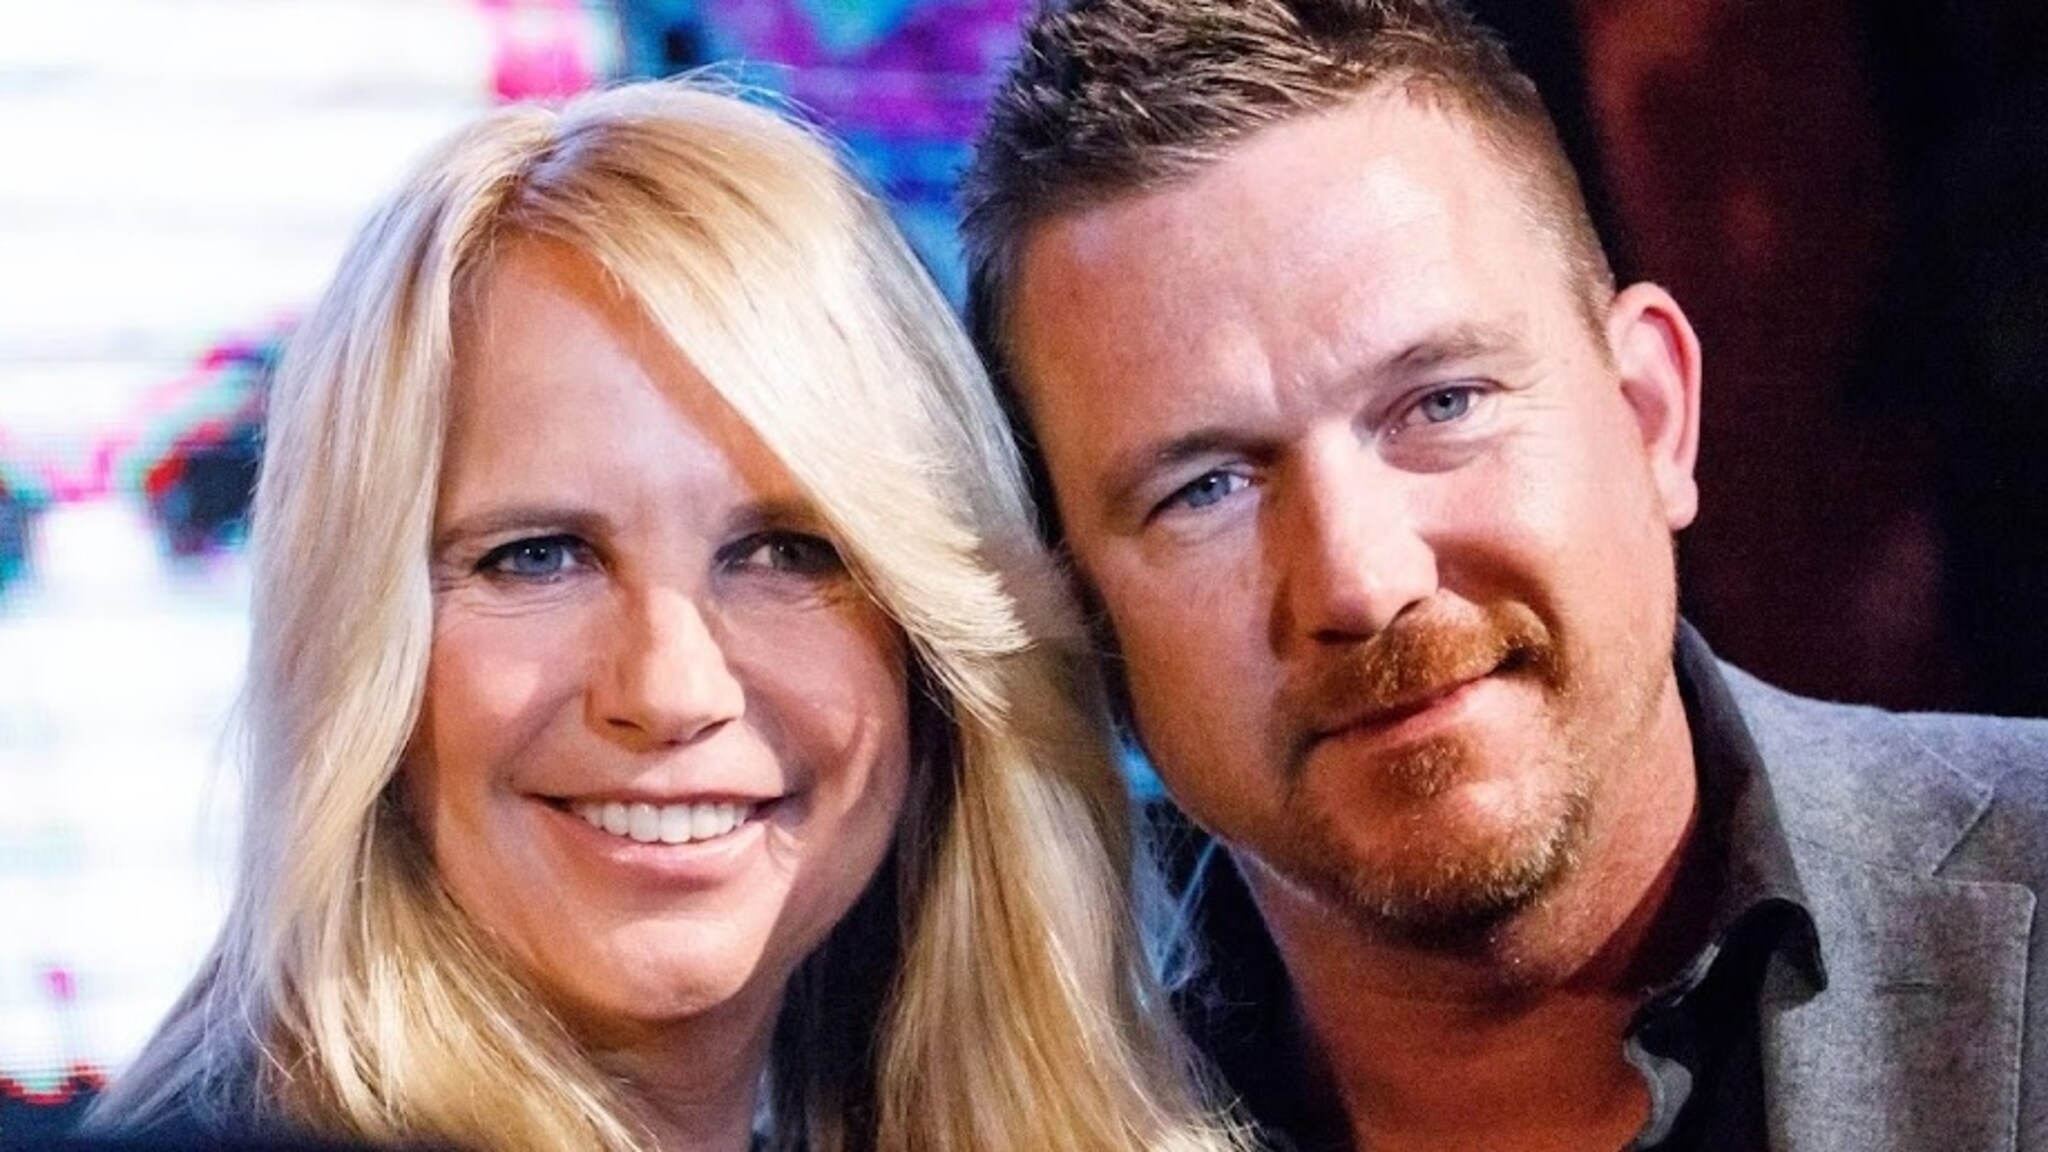 Linda de Mol has an affair with Johnny: 'He's literally being held hostage'